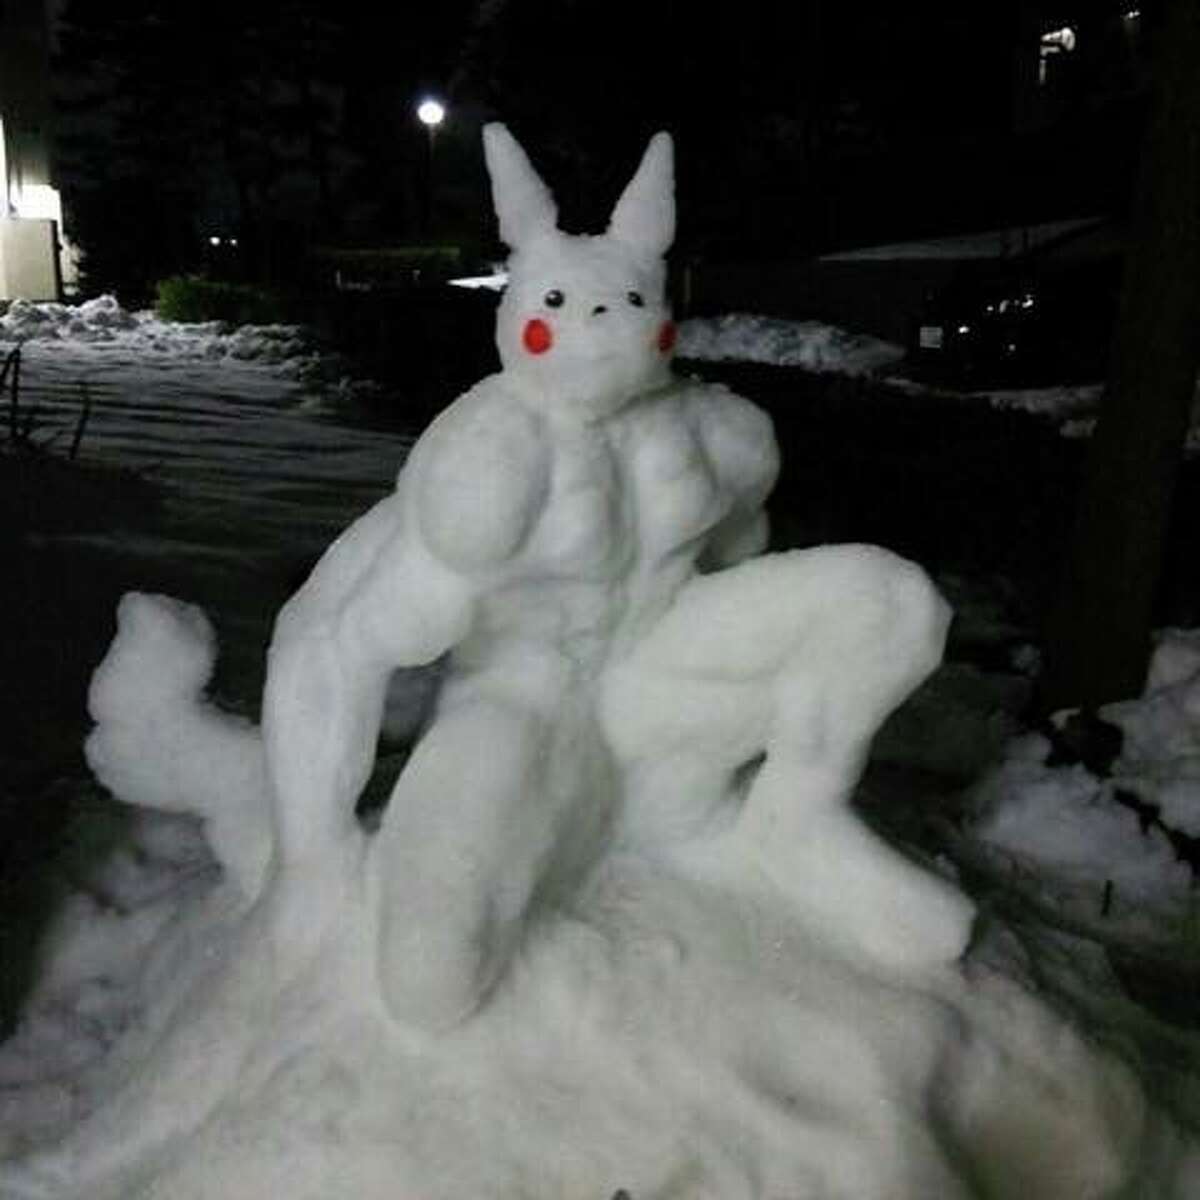 Rance Sama says he and his family spent an hour creating this snow figure of Pikachu.